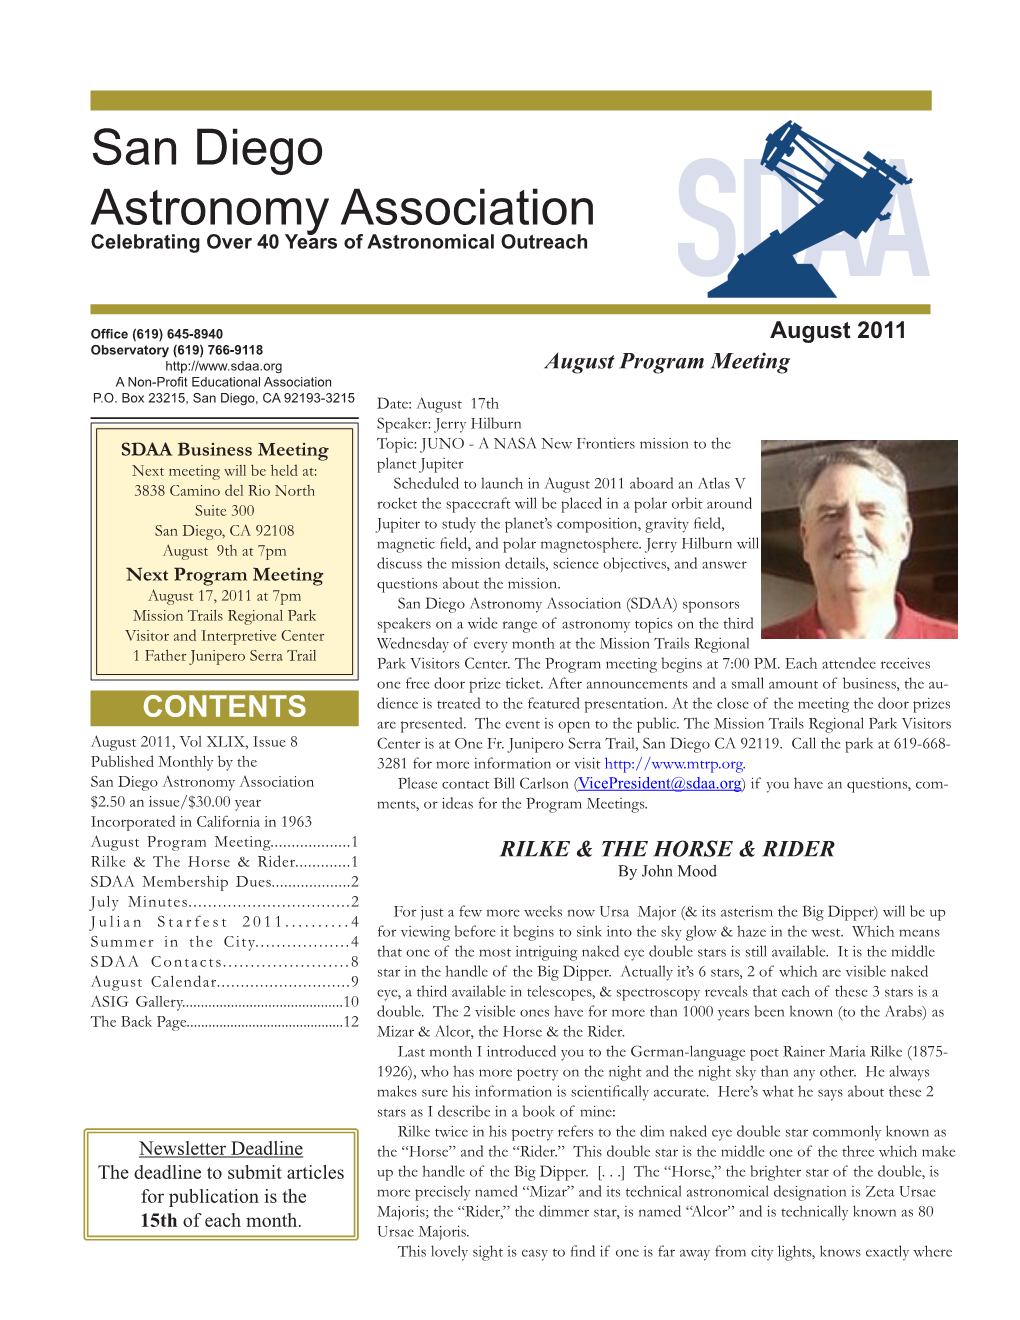 San Diego Astronomy Association Celebrating Over 40 Years of Astronomical Outreach